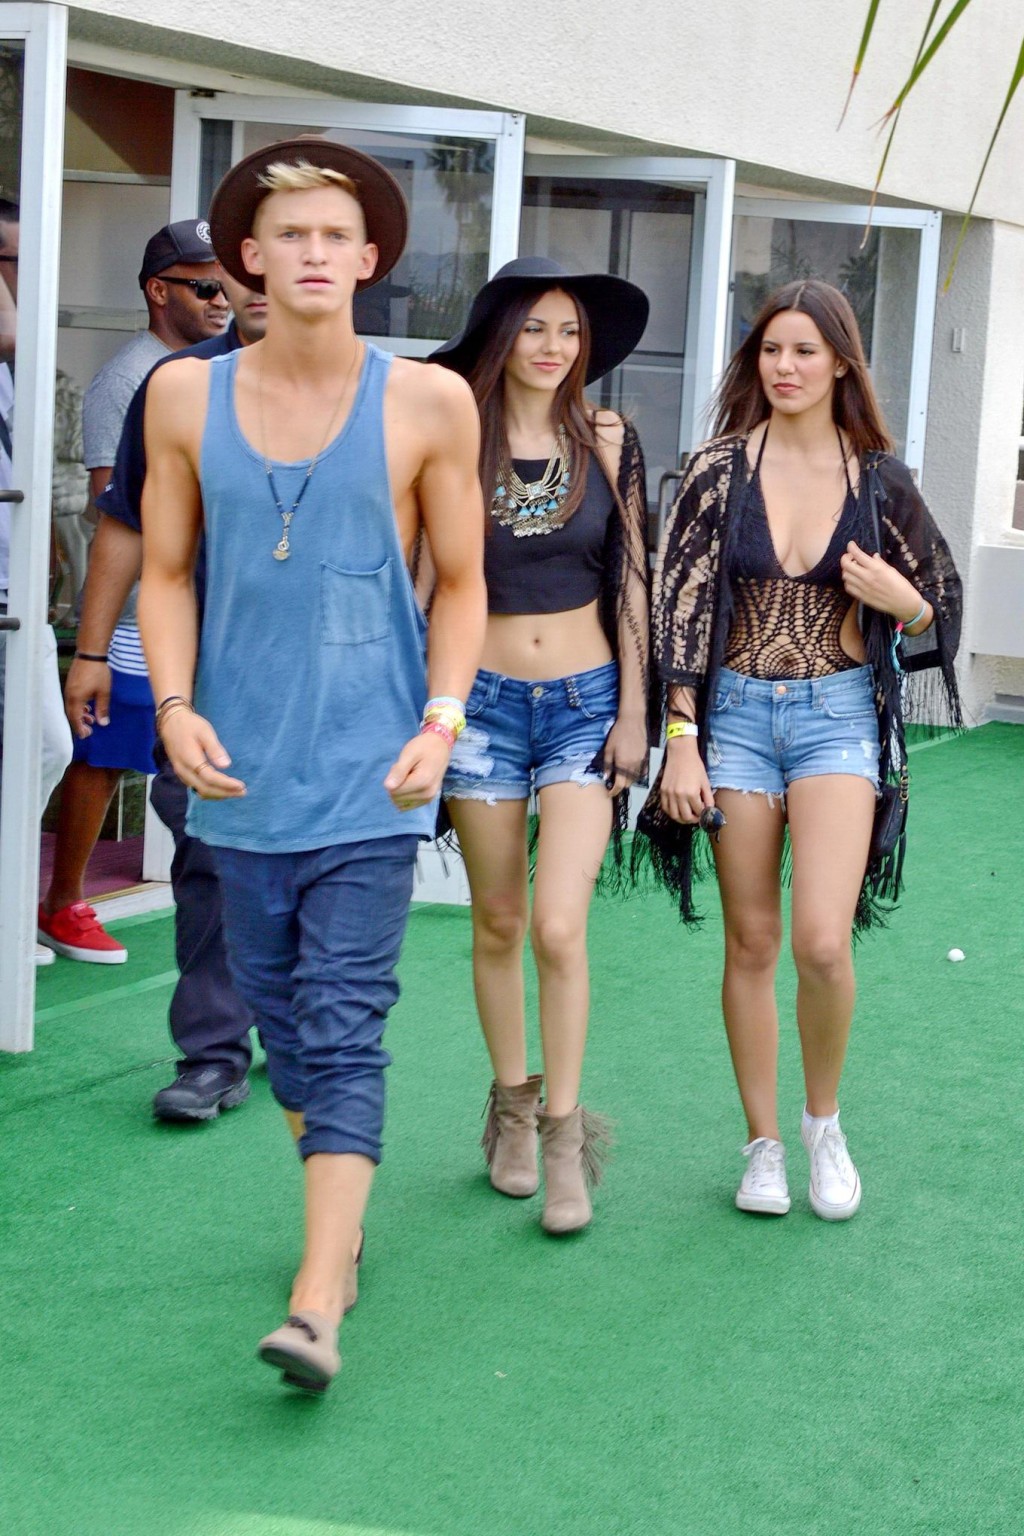 Victoria Justice wearing denim shorts and belly top at the Hard Rock Hotel Pool  #75198991